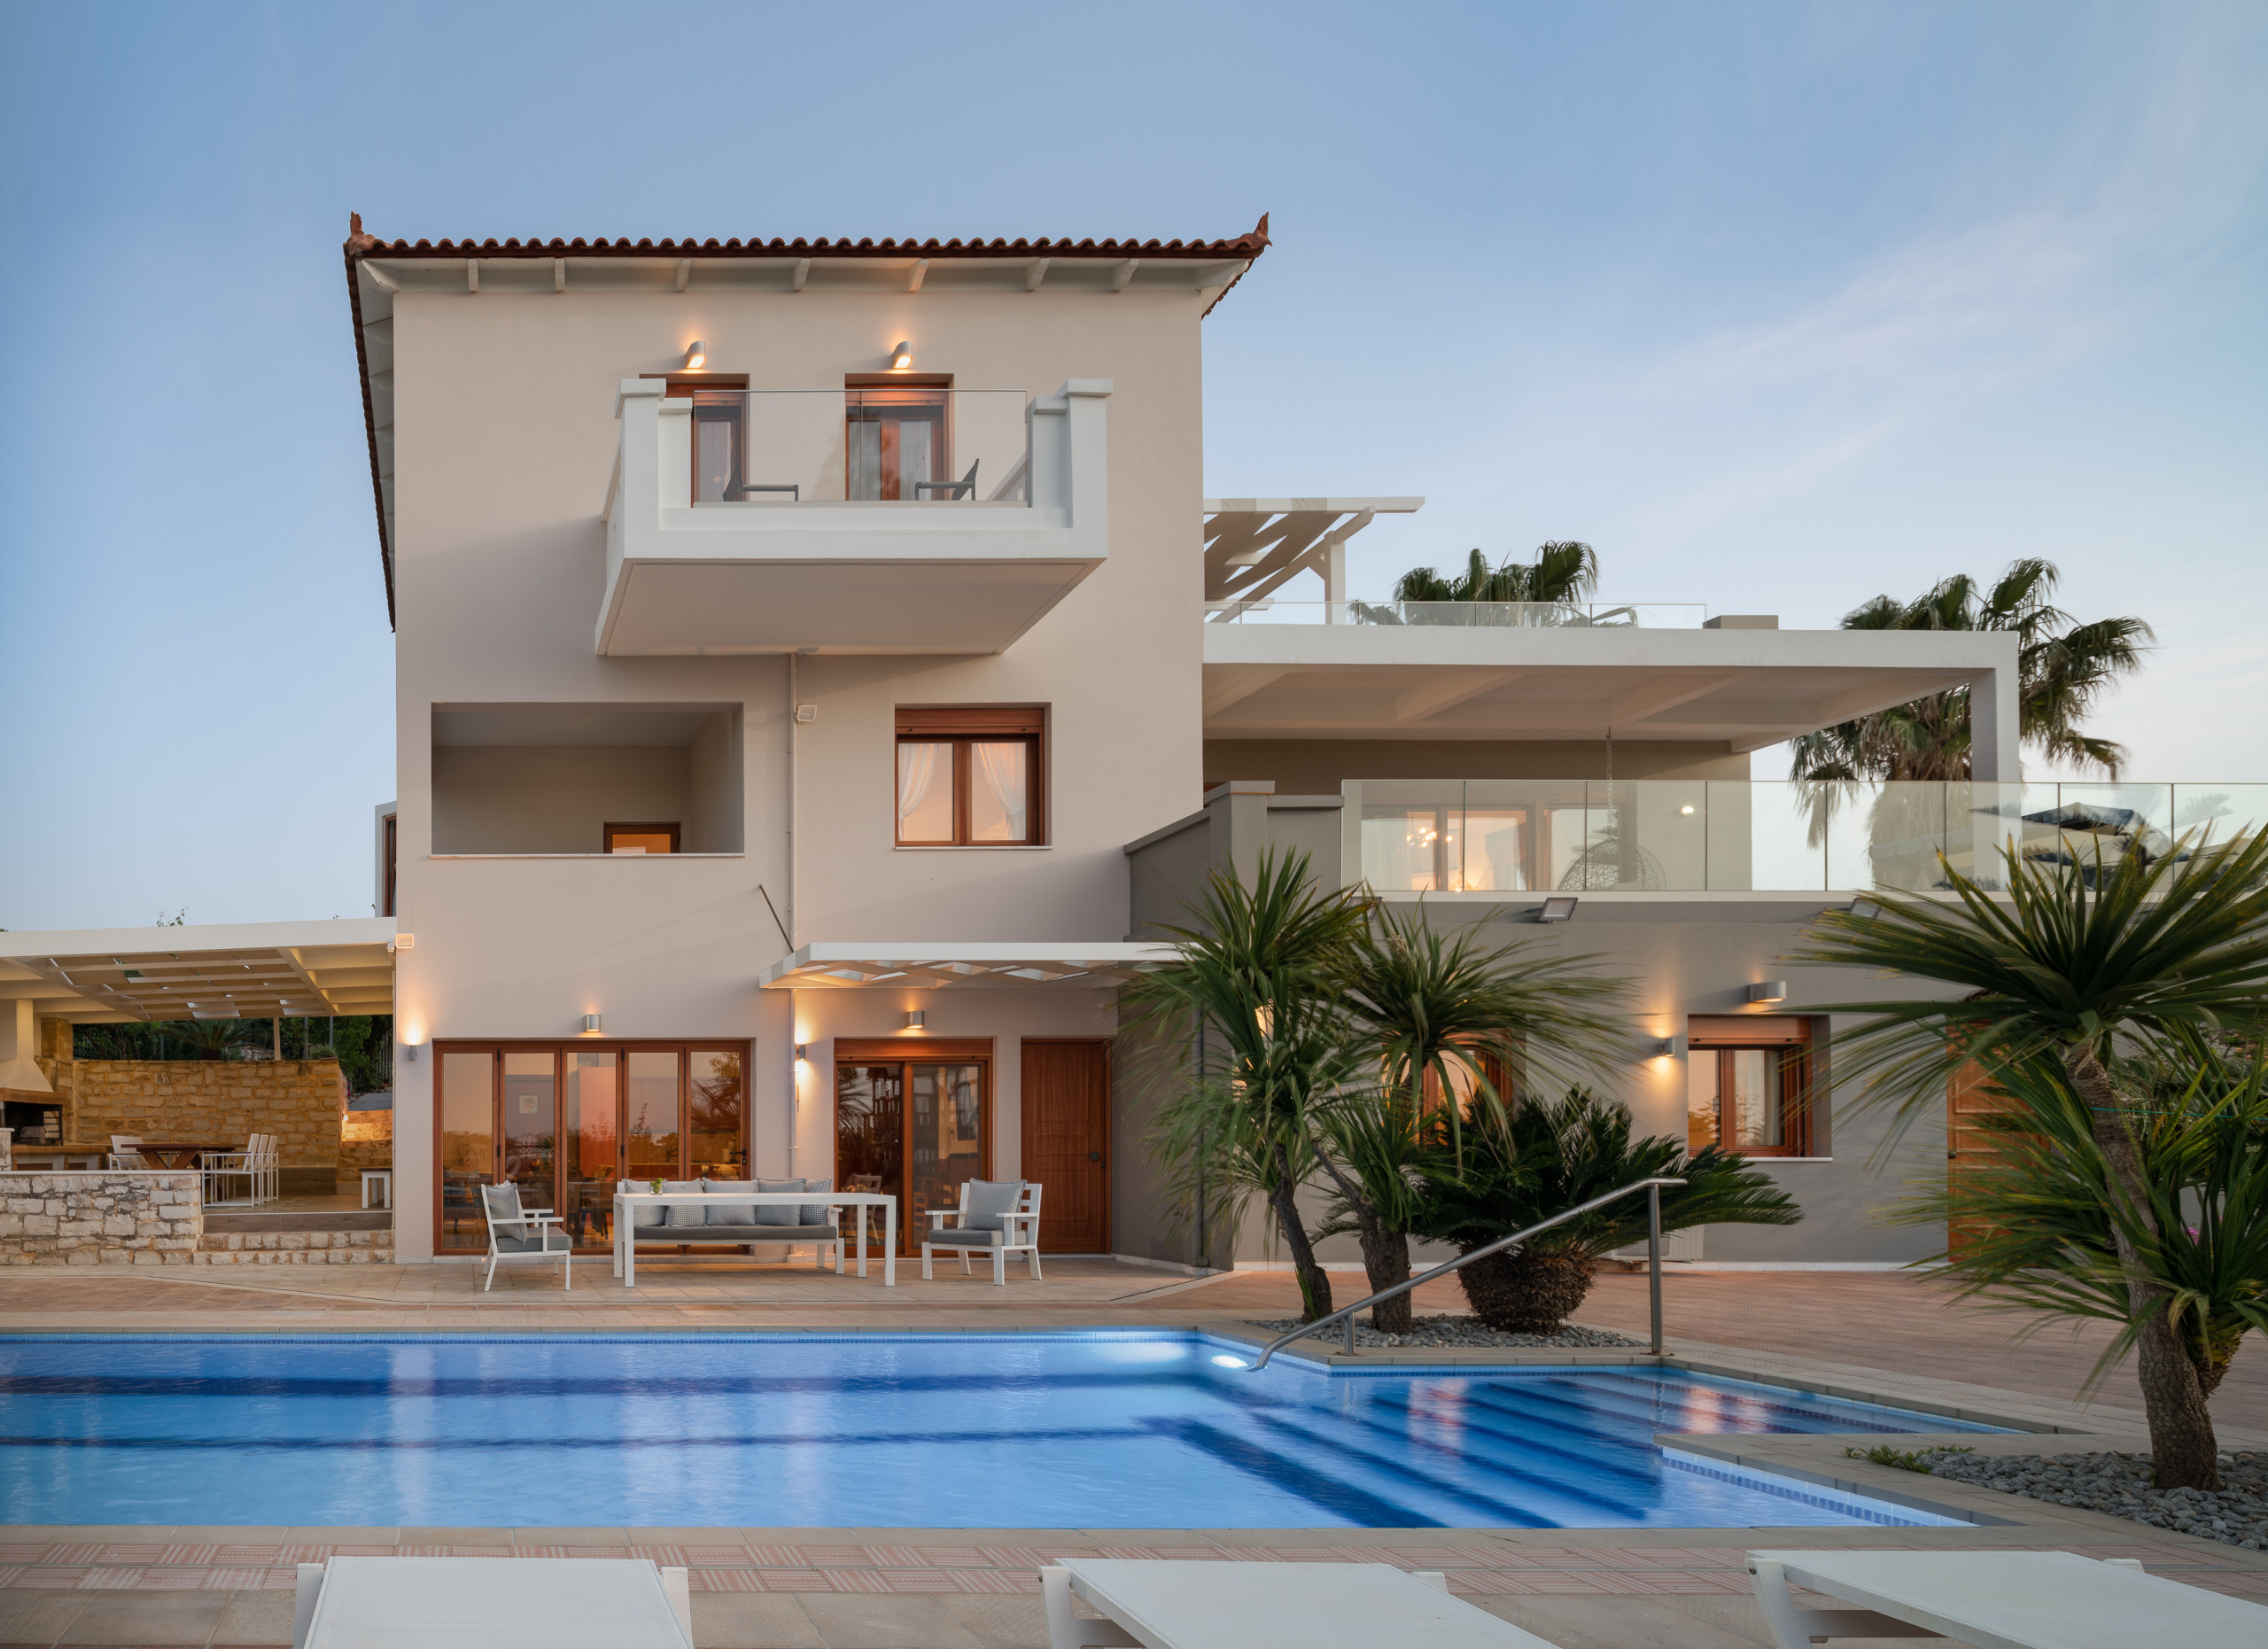 Tsourlakis Residence, an oasis of tranquility